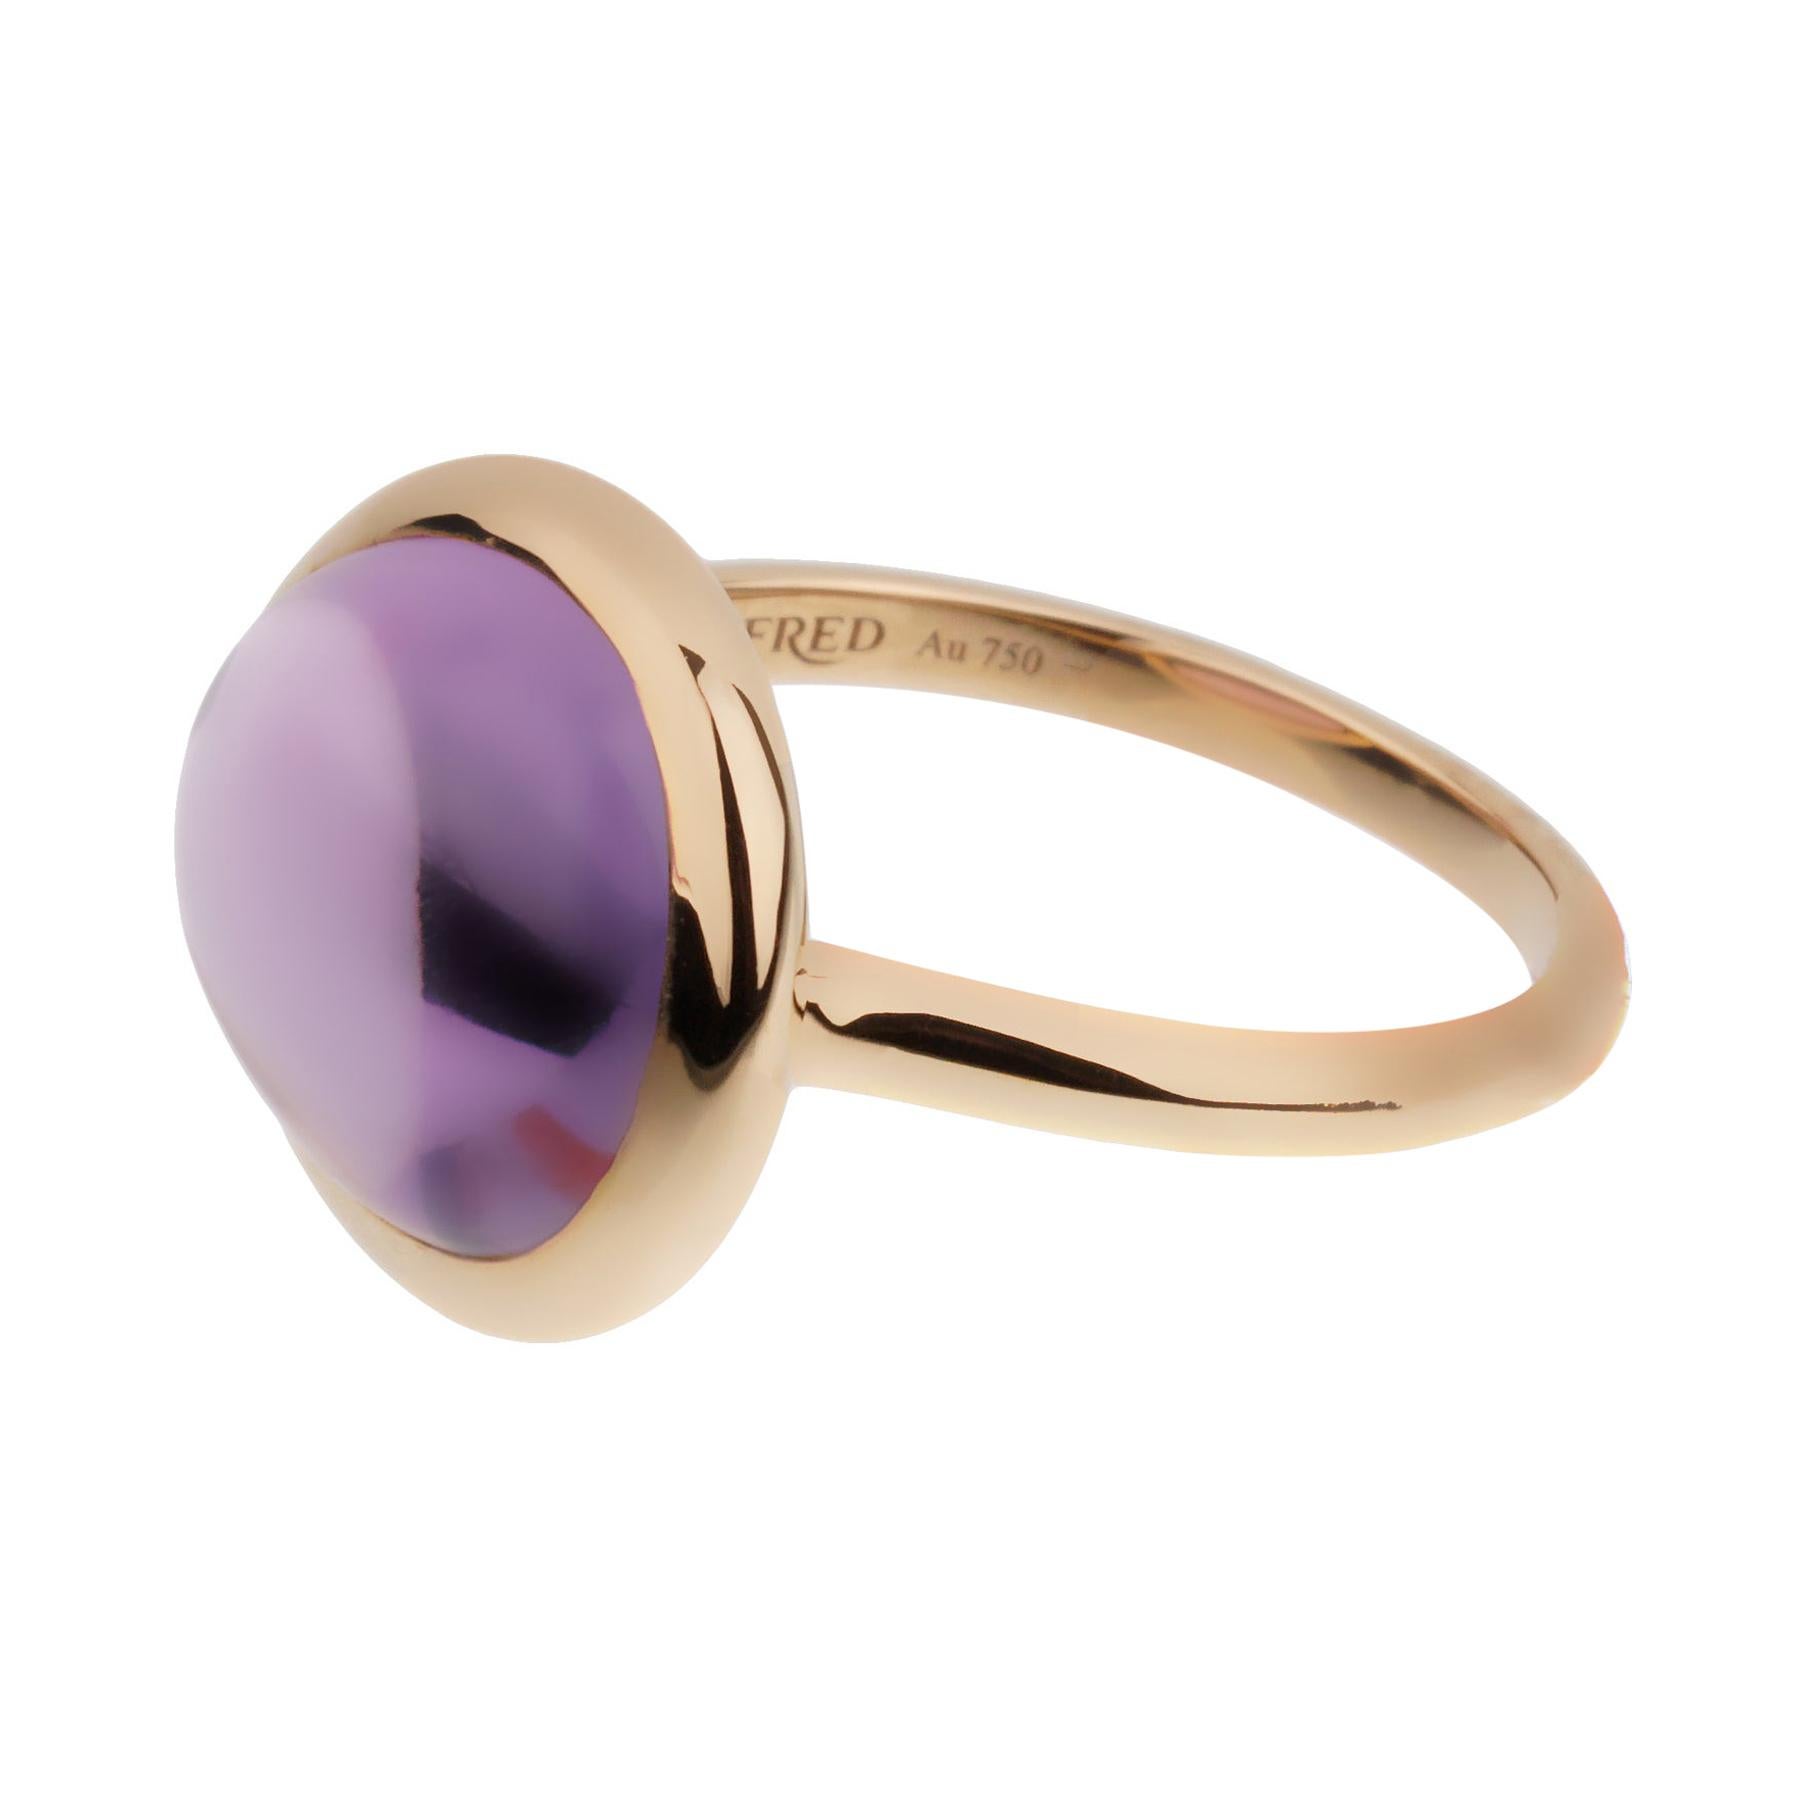 A chic Fred of Paris rose gold cocktail ring showcasing a 7ct cabochon Amethyst set in 18k gold. The ring measures a size 6 and can be resized if needed.